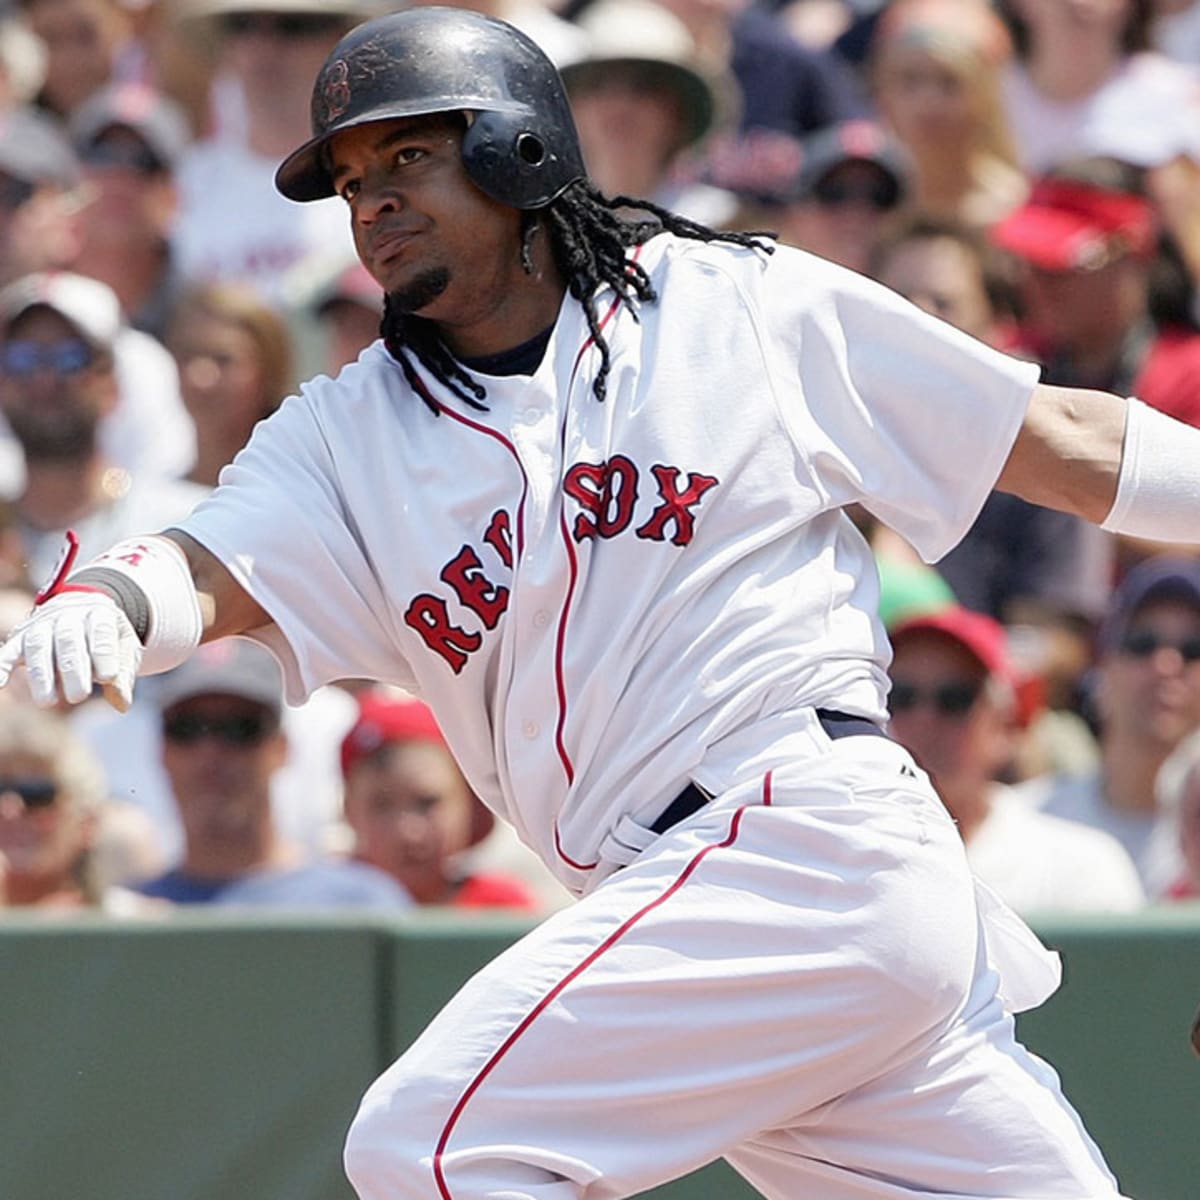 Hall of Fame: Don't look for Manny Ramirez anytime soon - Sports